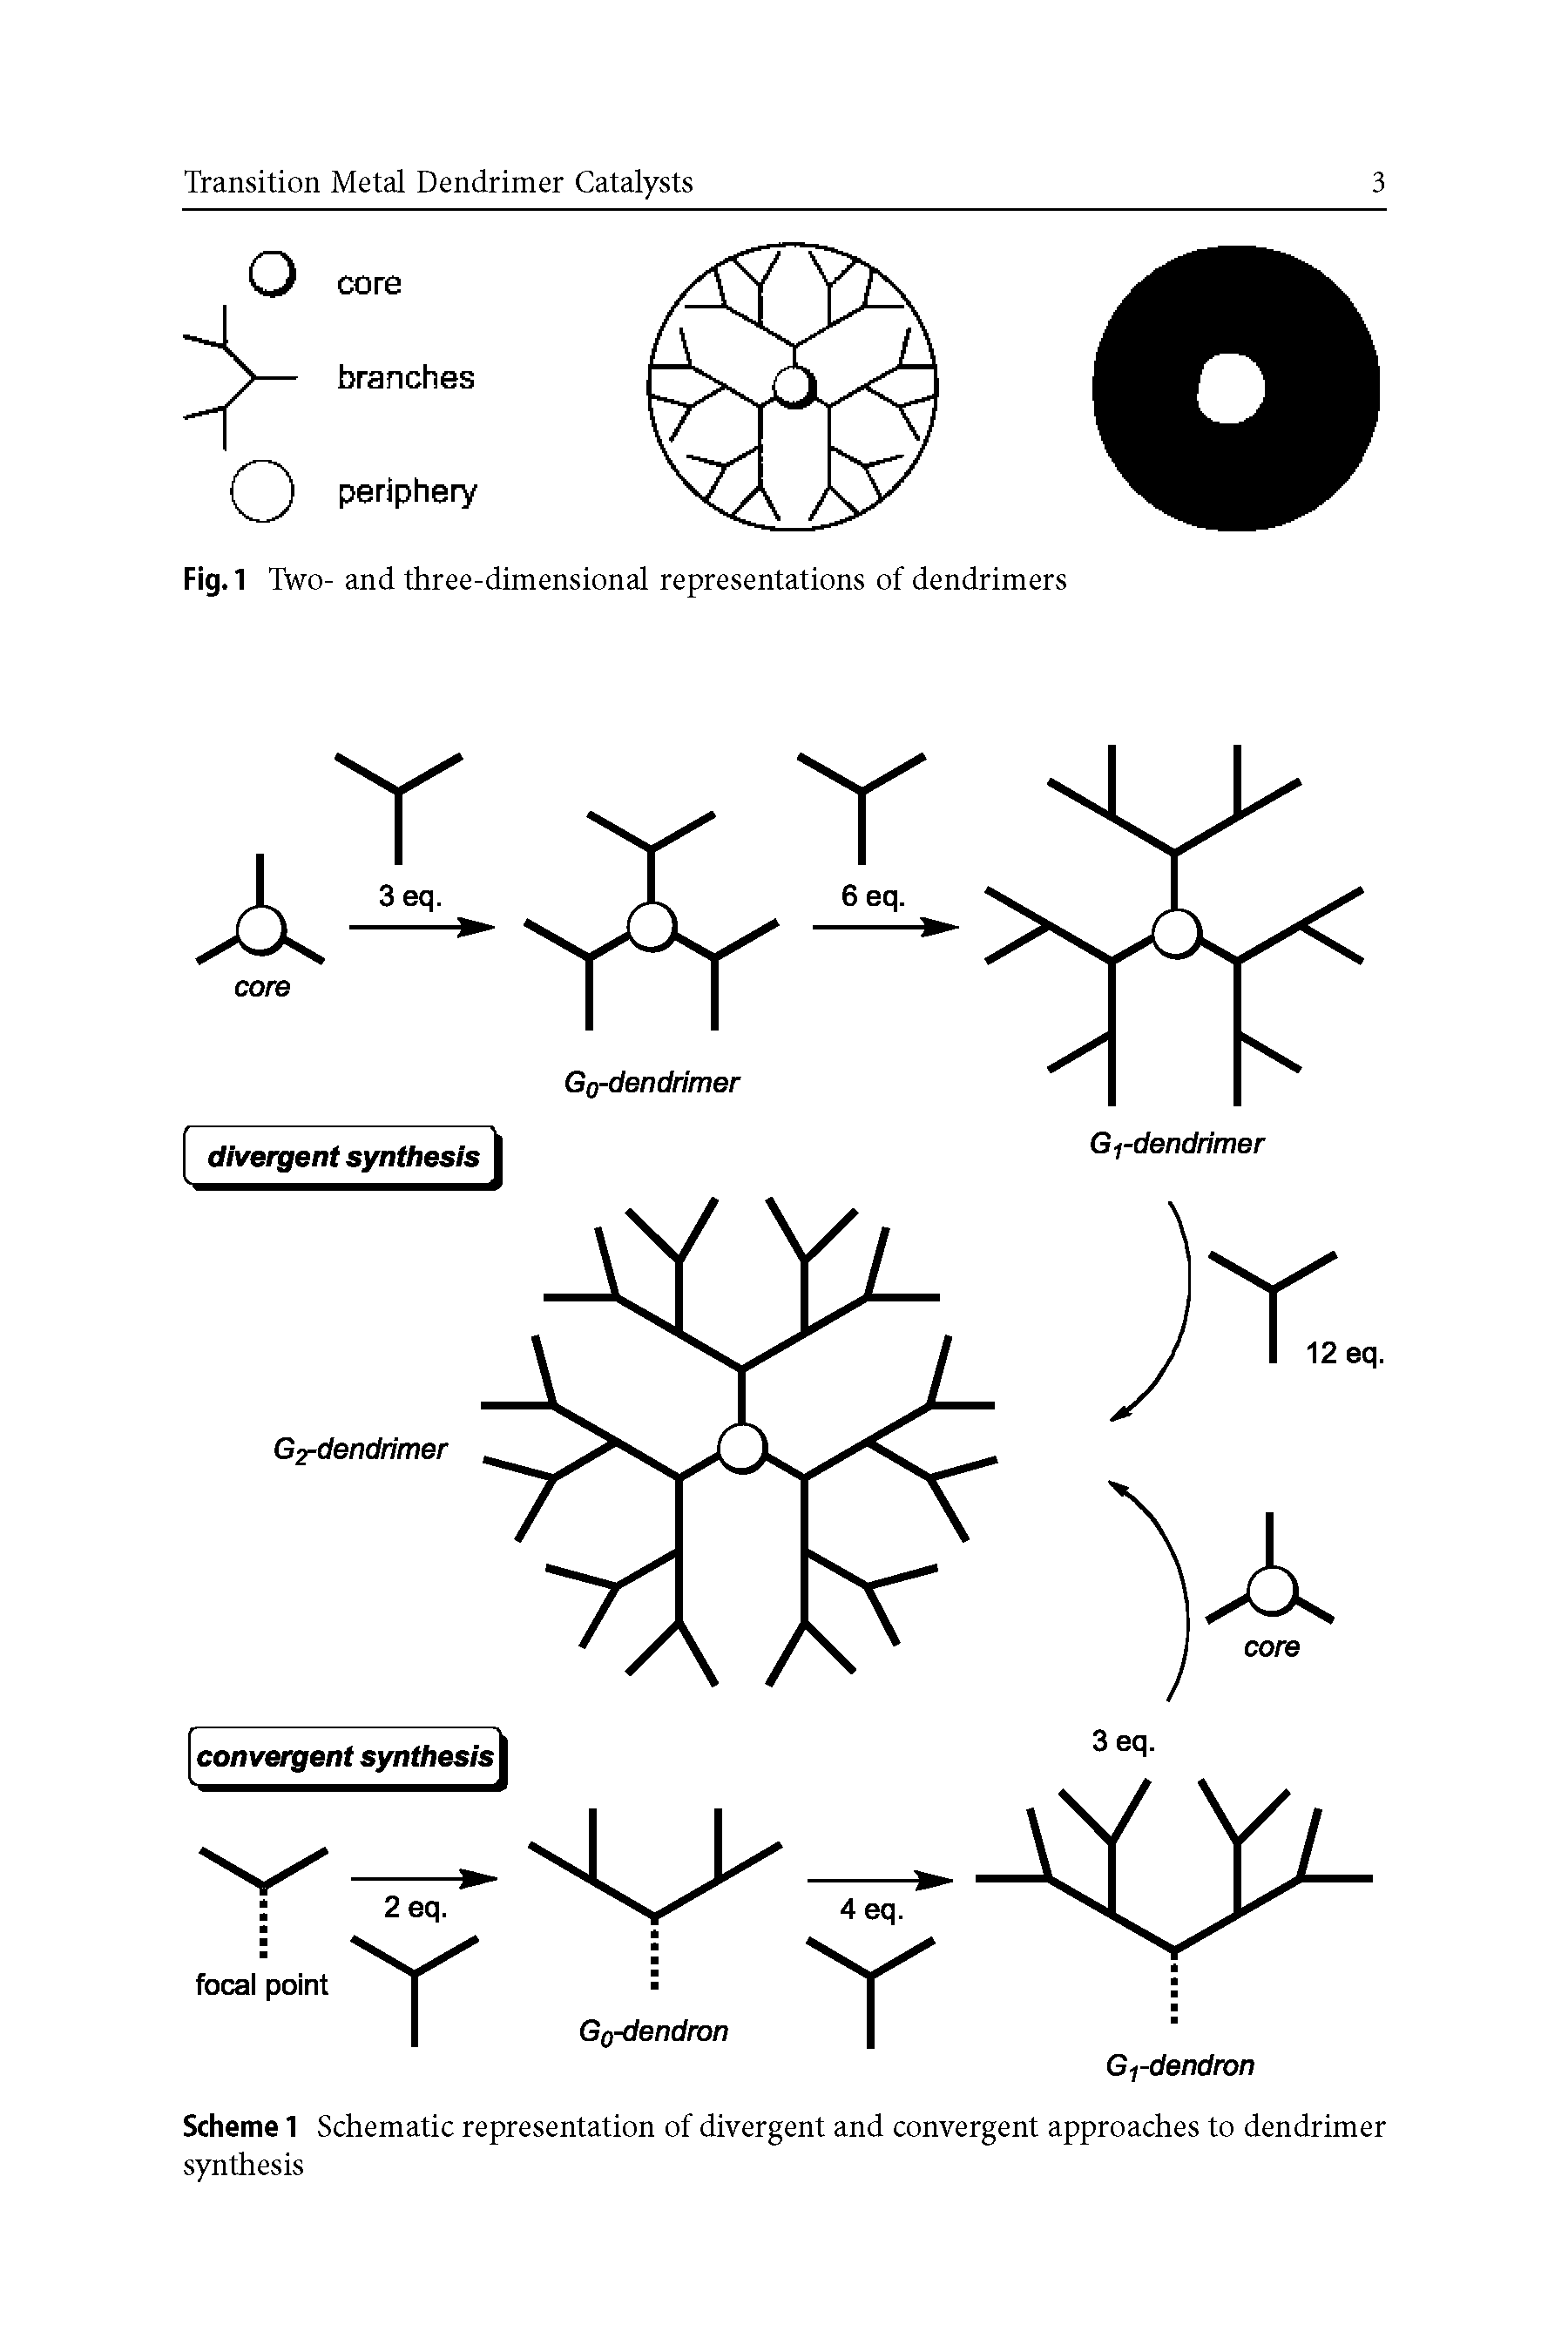 Scheme 1 Schematic representation of divergent and convergent approaches to dendrimer synthesis...